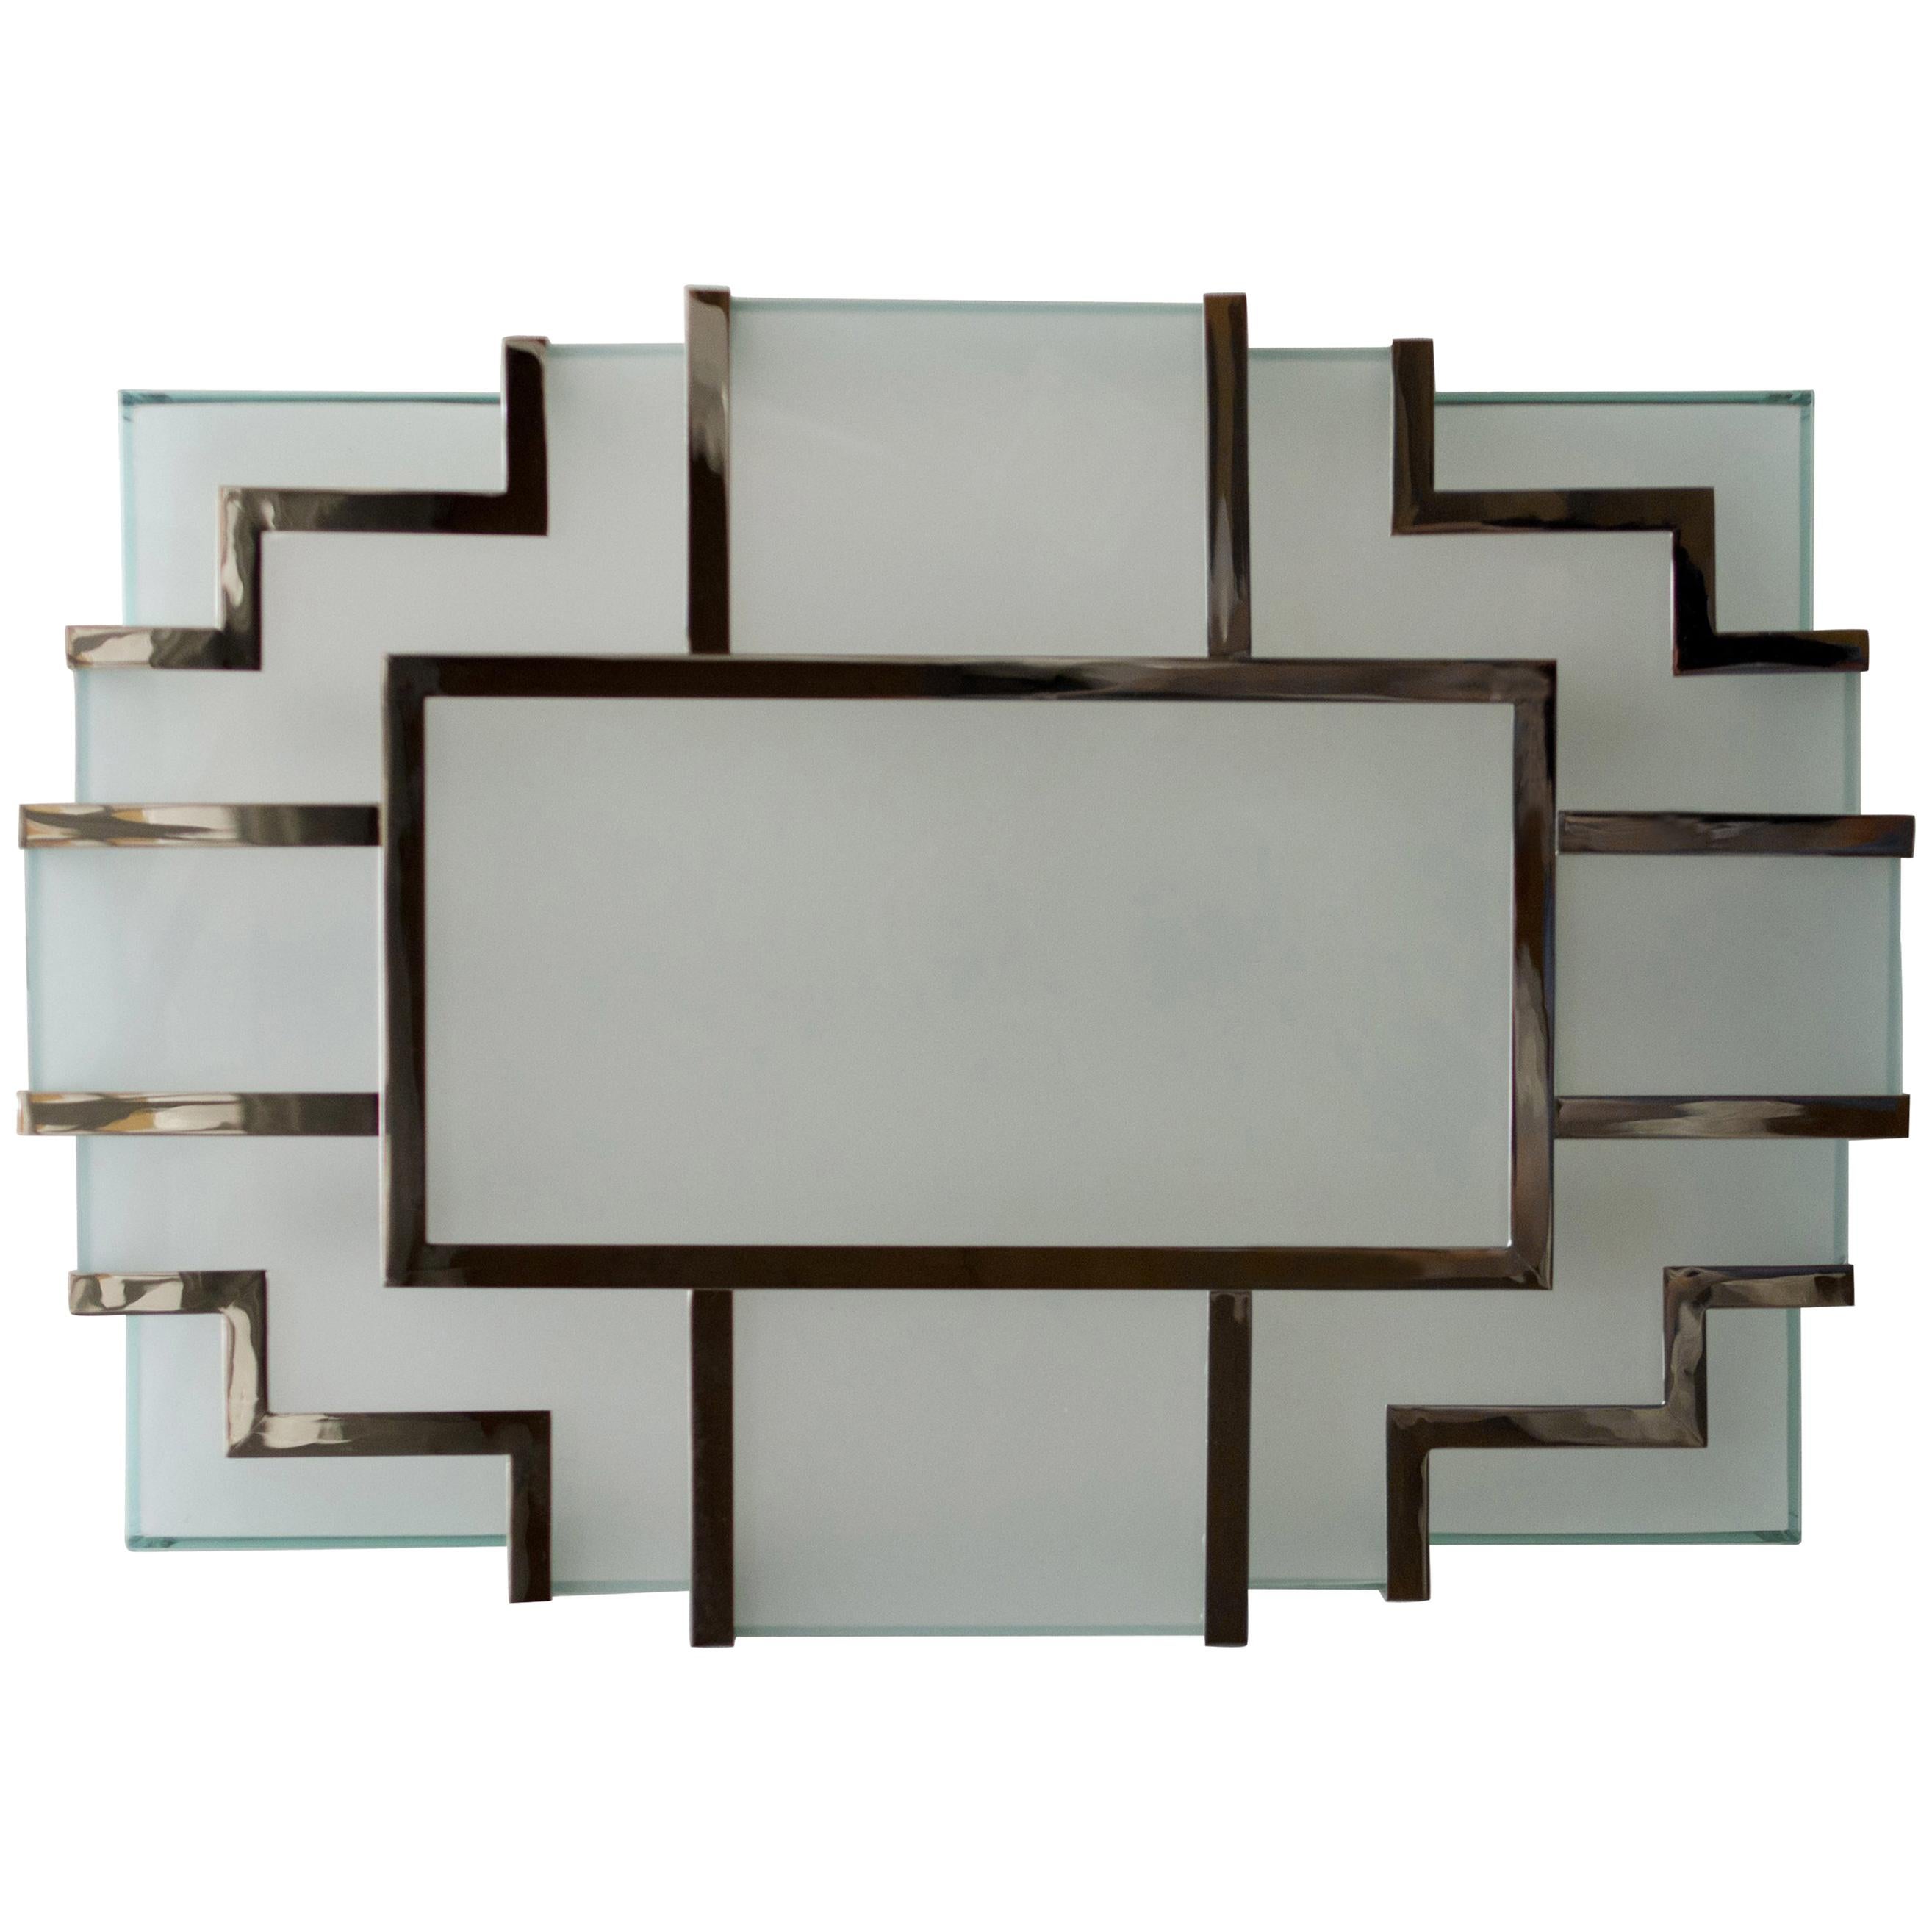 Art Deco modernist brass ceiling lamp with nickel finish.